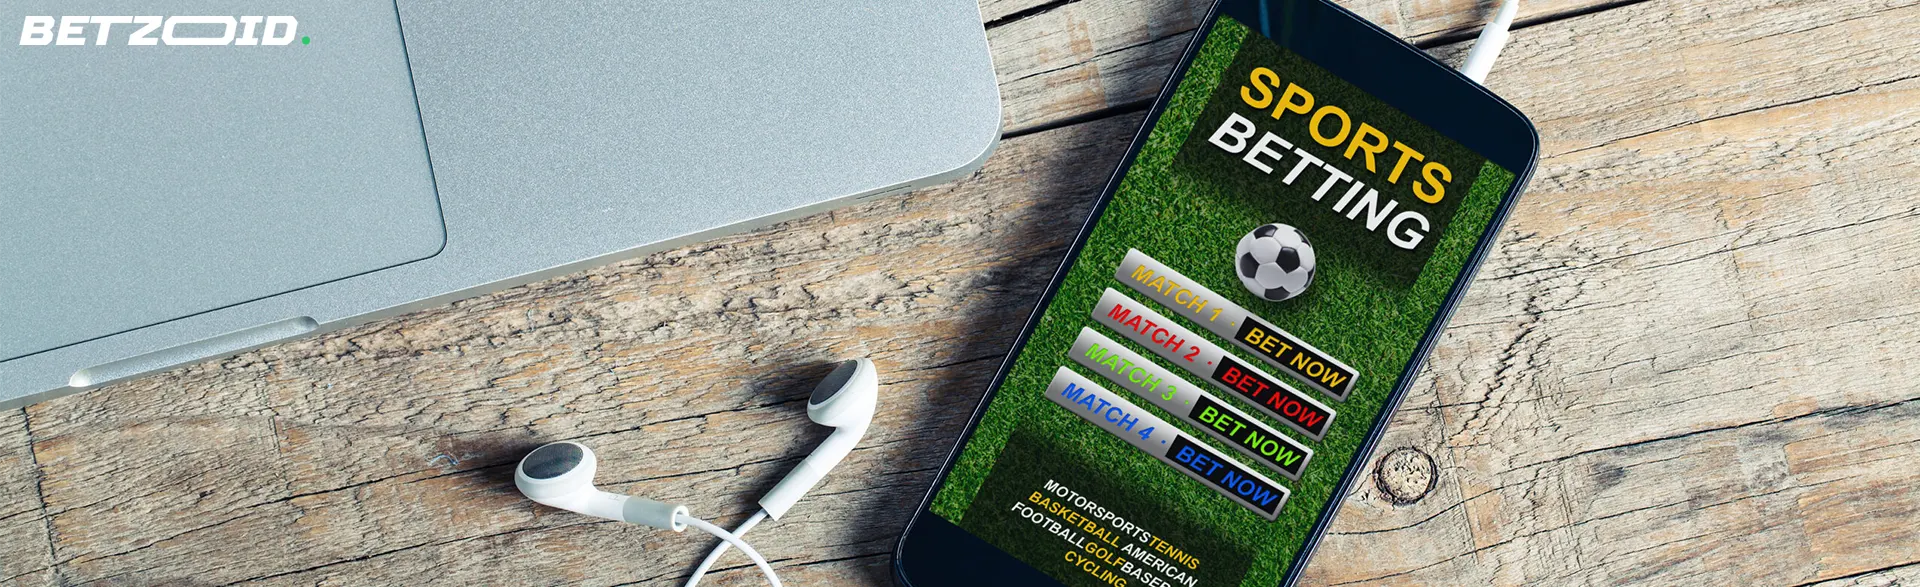 Smartphone displaying sports betting options next to a laptop and earphones, representing C$10 deposit betting sites in Canada.